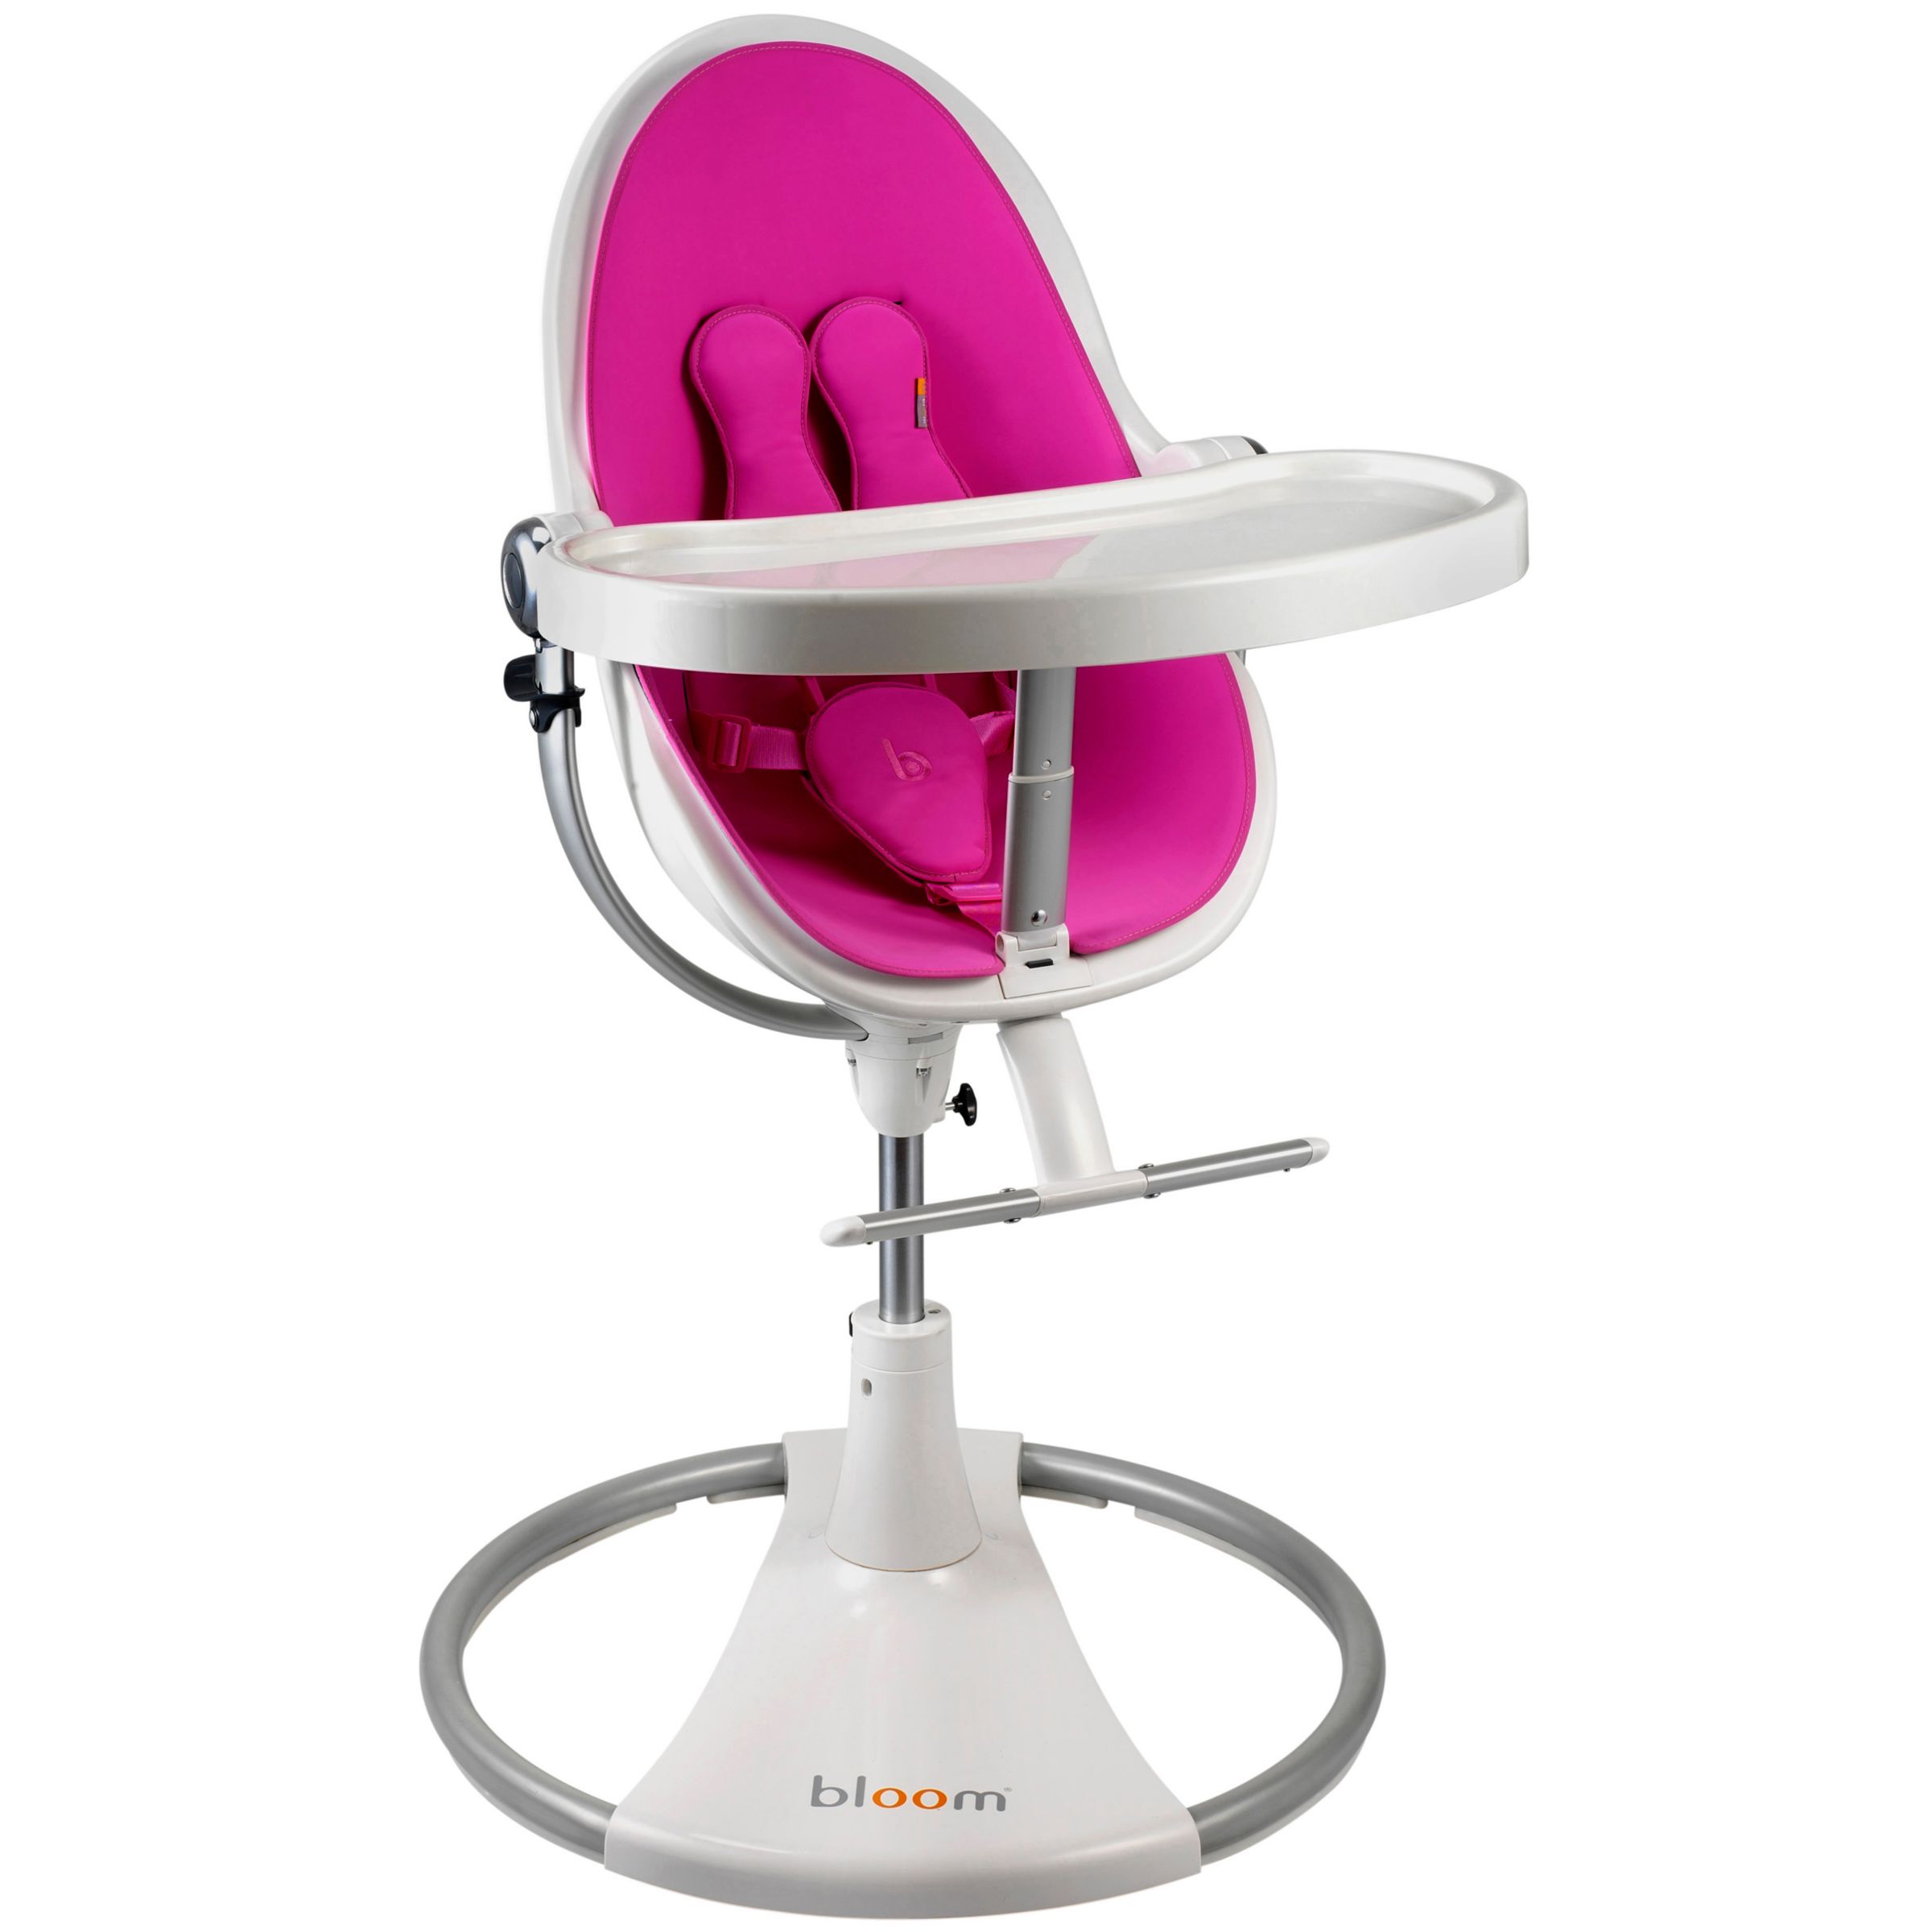 bloom Fresco Classic Contemporary Leatherette Baby Chair, Ivory White with Rosy Pink at JohnLewis